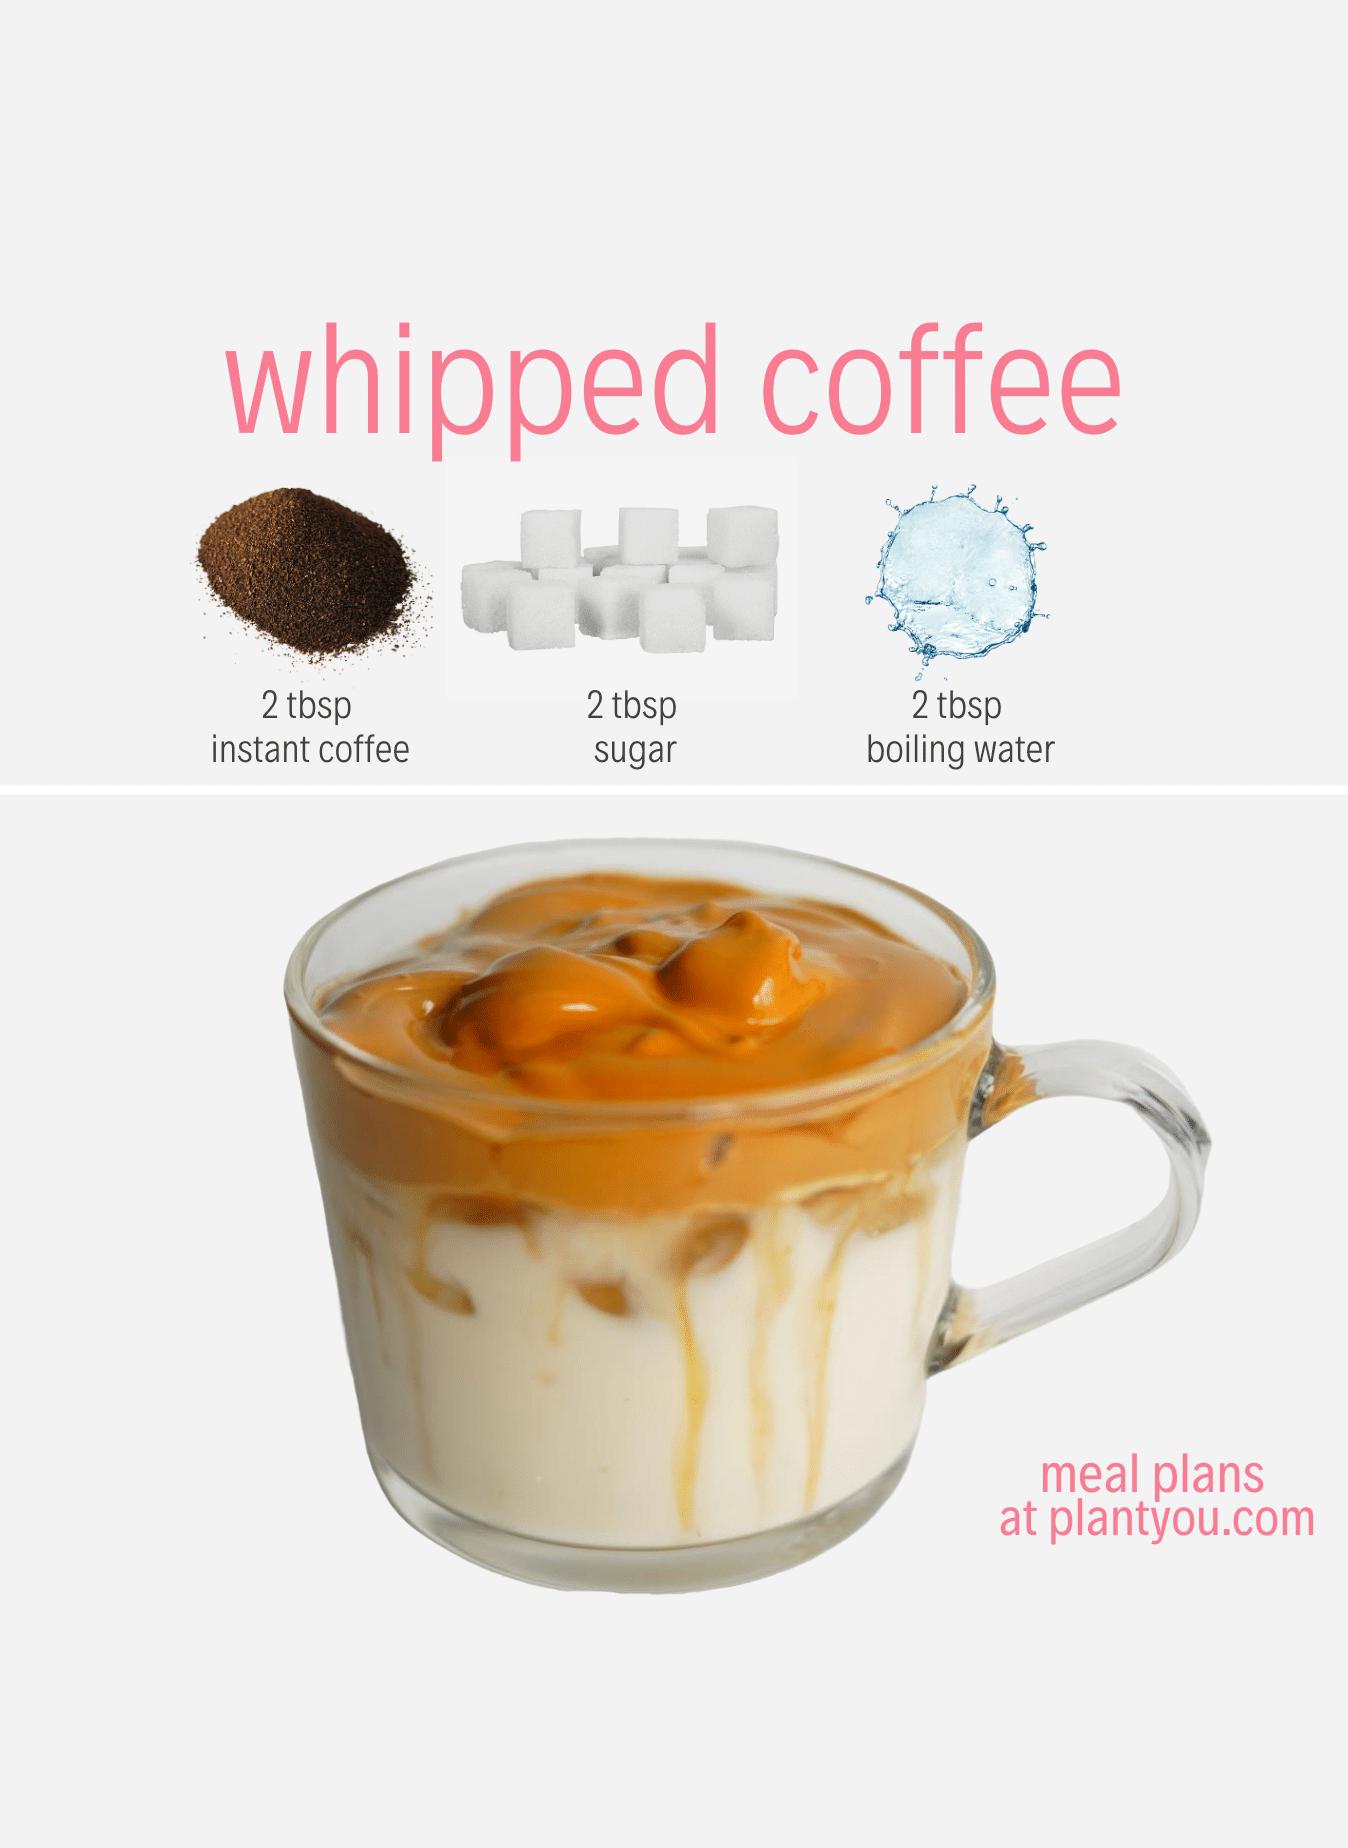  Make your own whipped coffee at home with just a few ingredients.